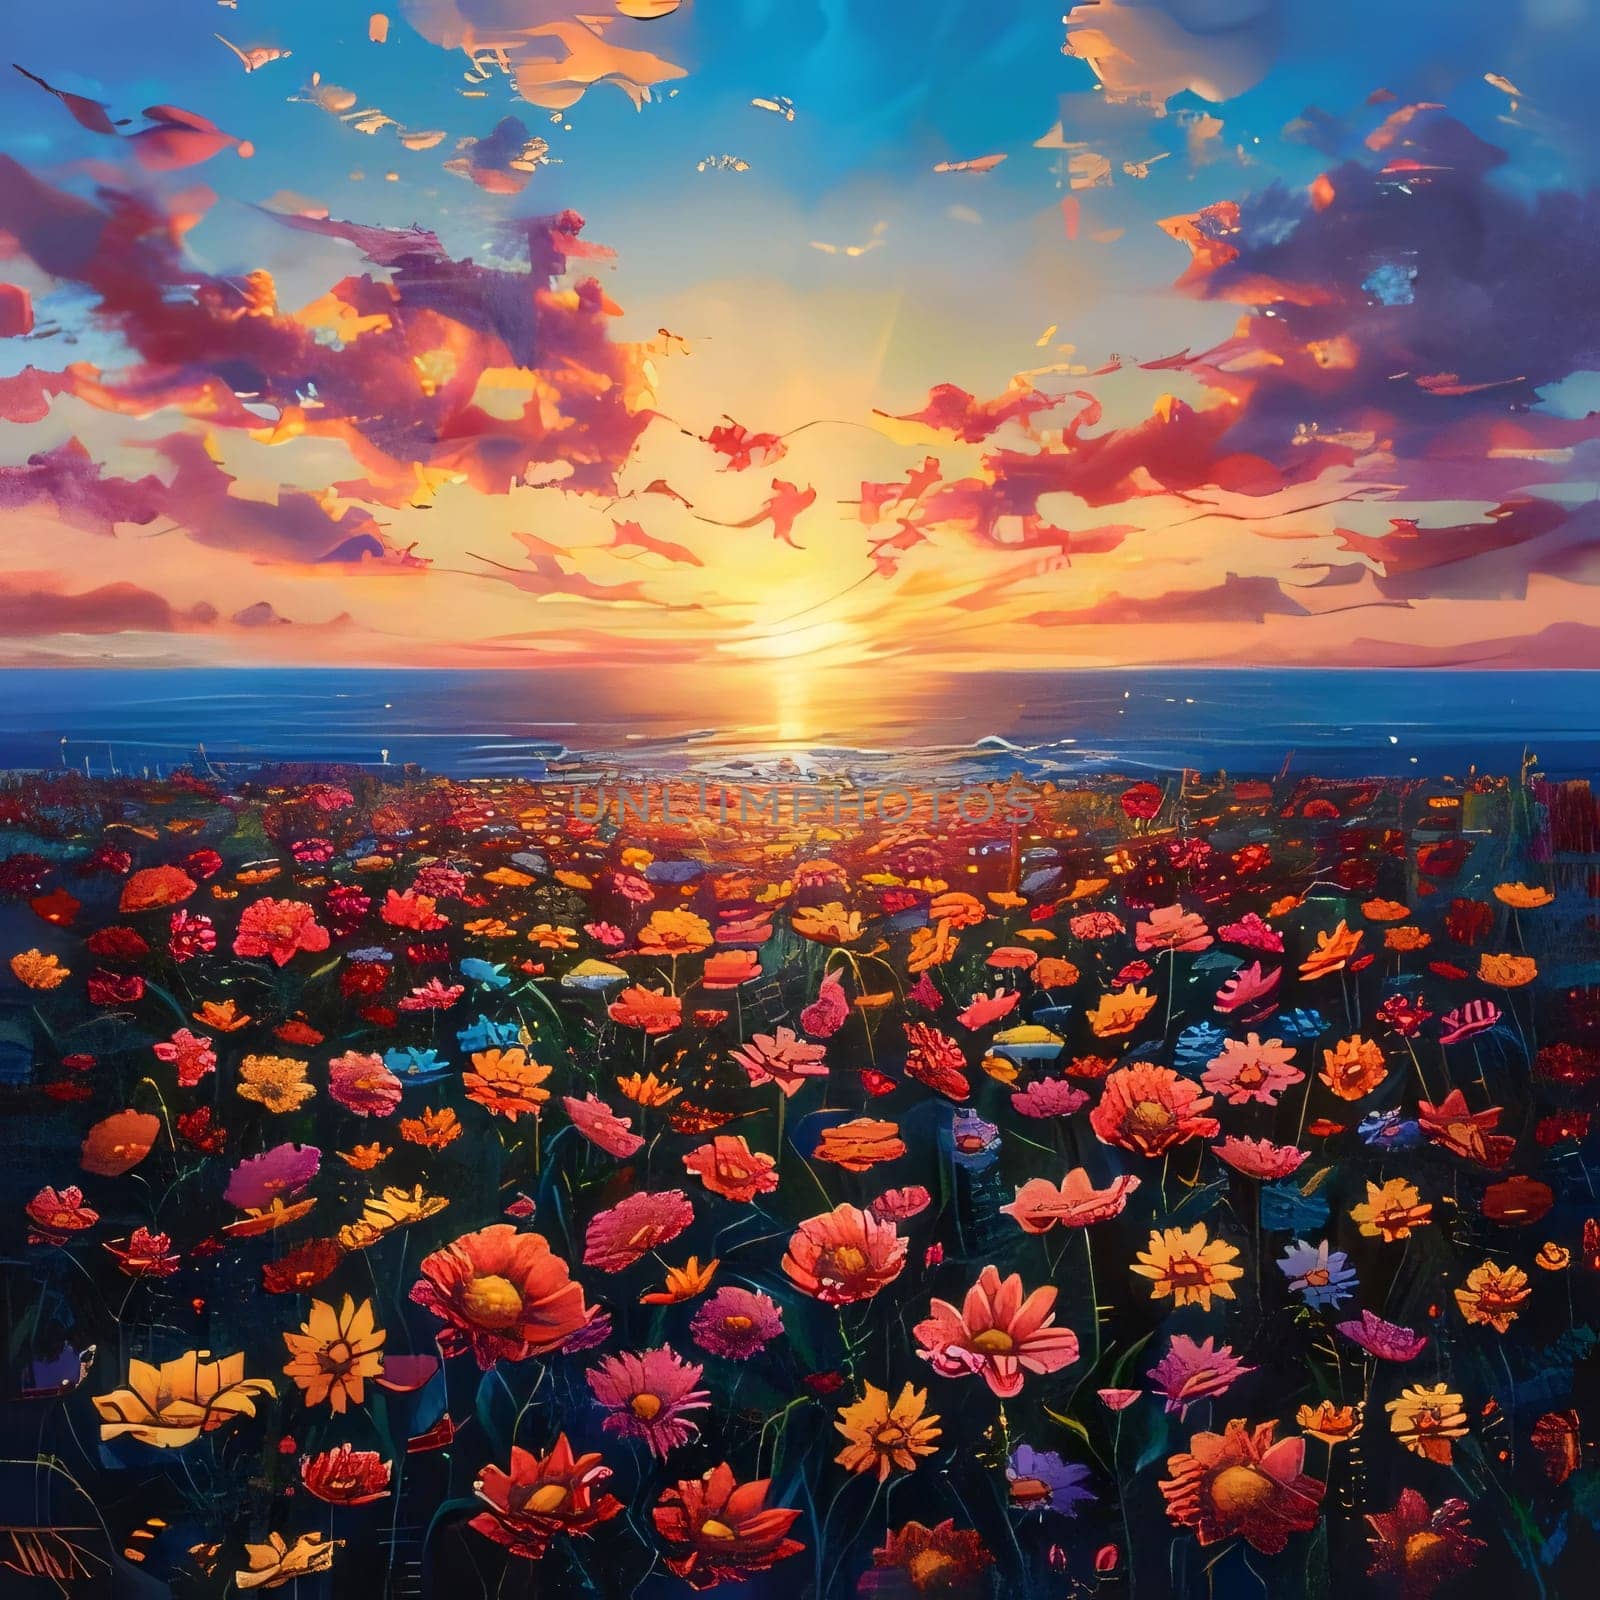 Illustration of a field full of colorful orange, pink red Flowers at sunset. Flowering flowers, a symbol of spring, new life. by ThemesS